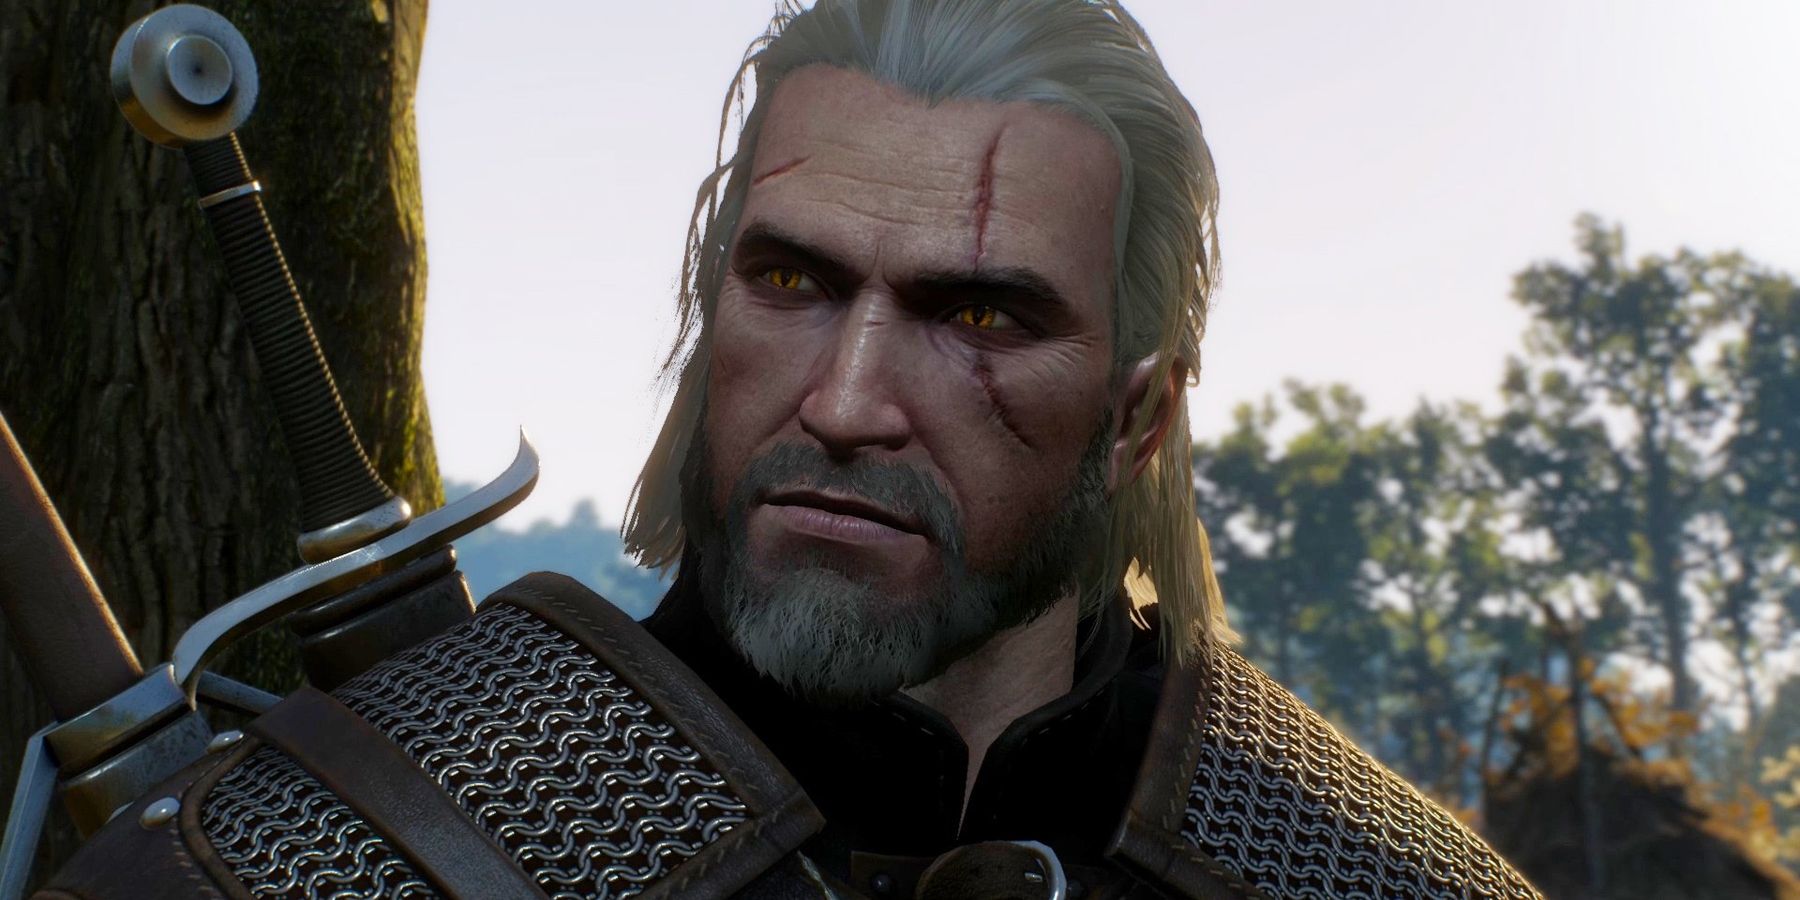 Screenshot of Geralt of Rivia from The Witcher 3: Wild Hunt